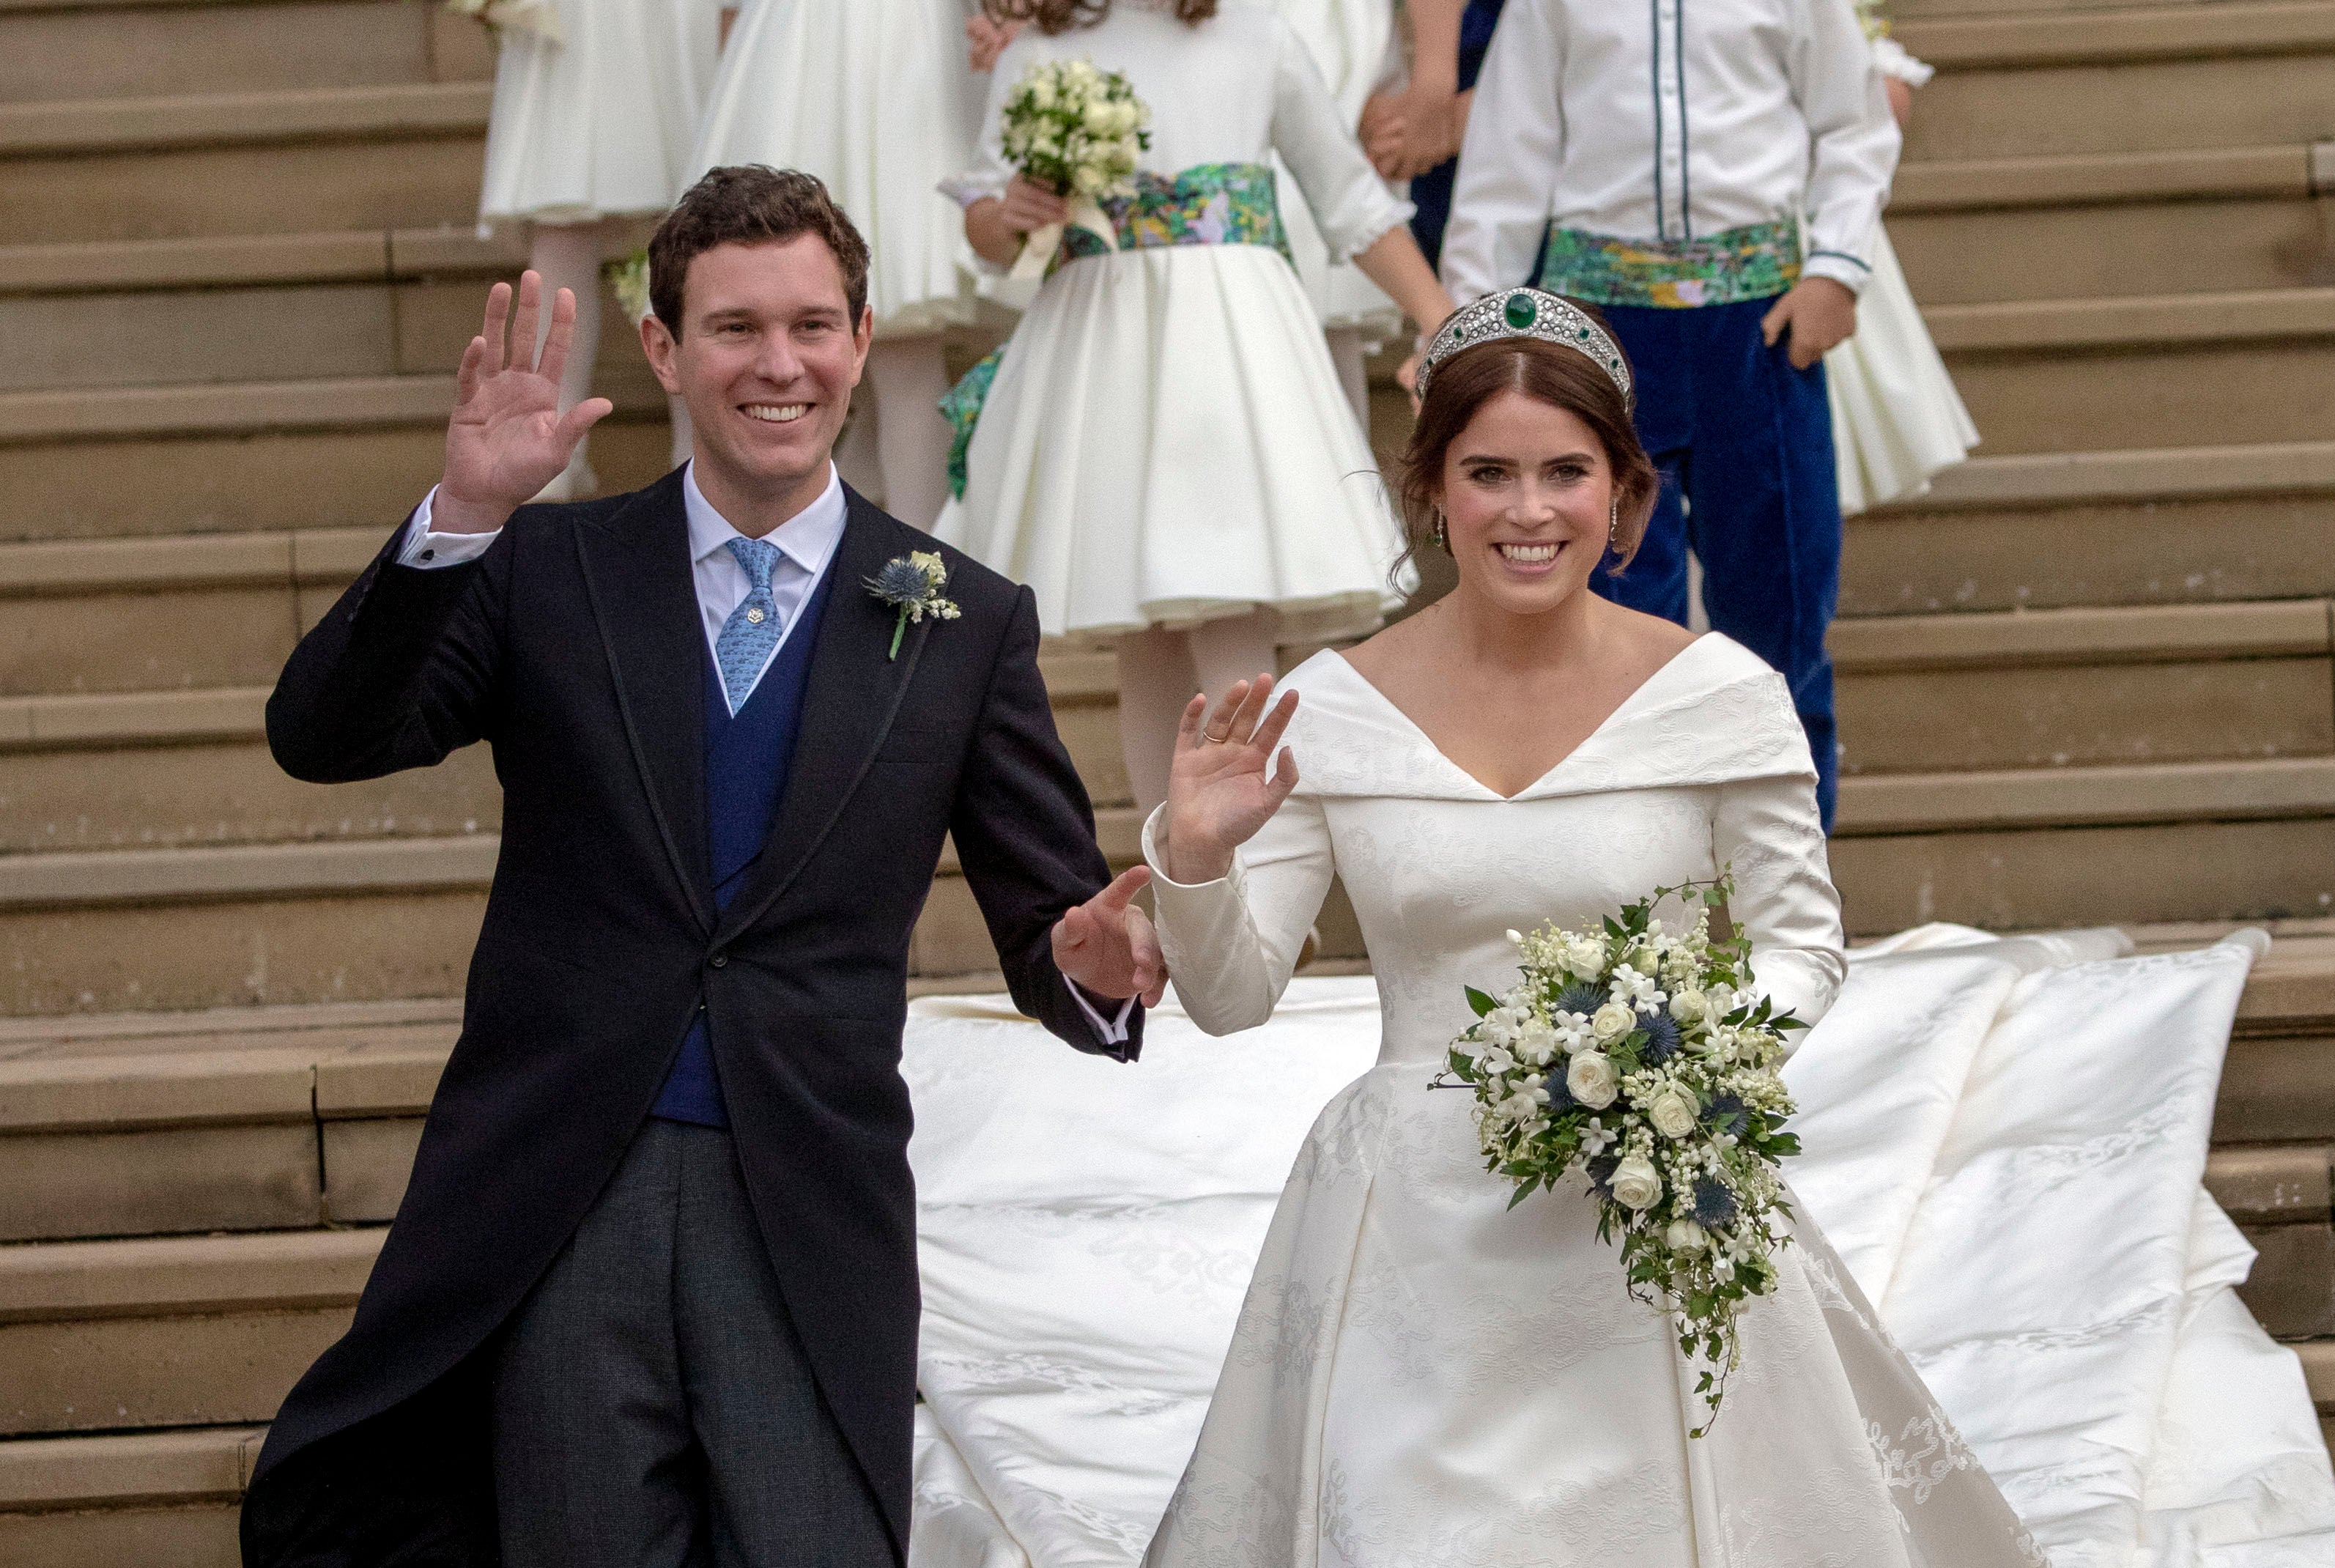 Princess Eugenie and Jack Brooksbank on their wedding day in 2018